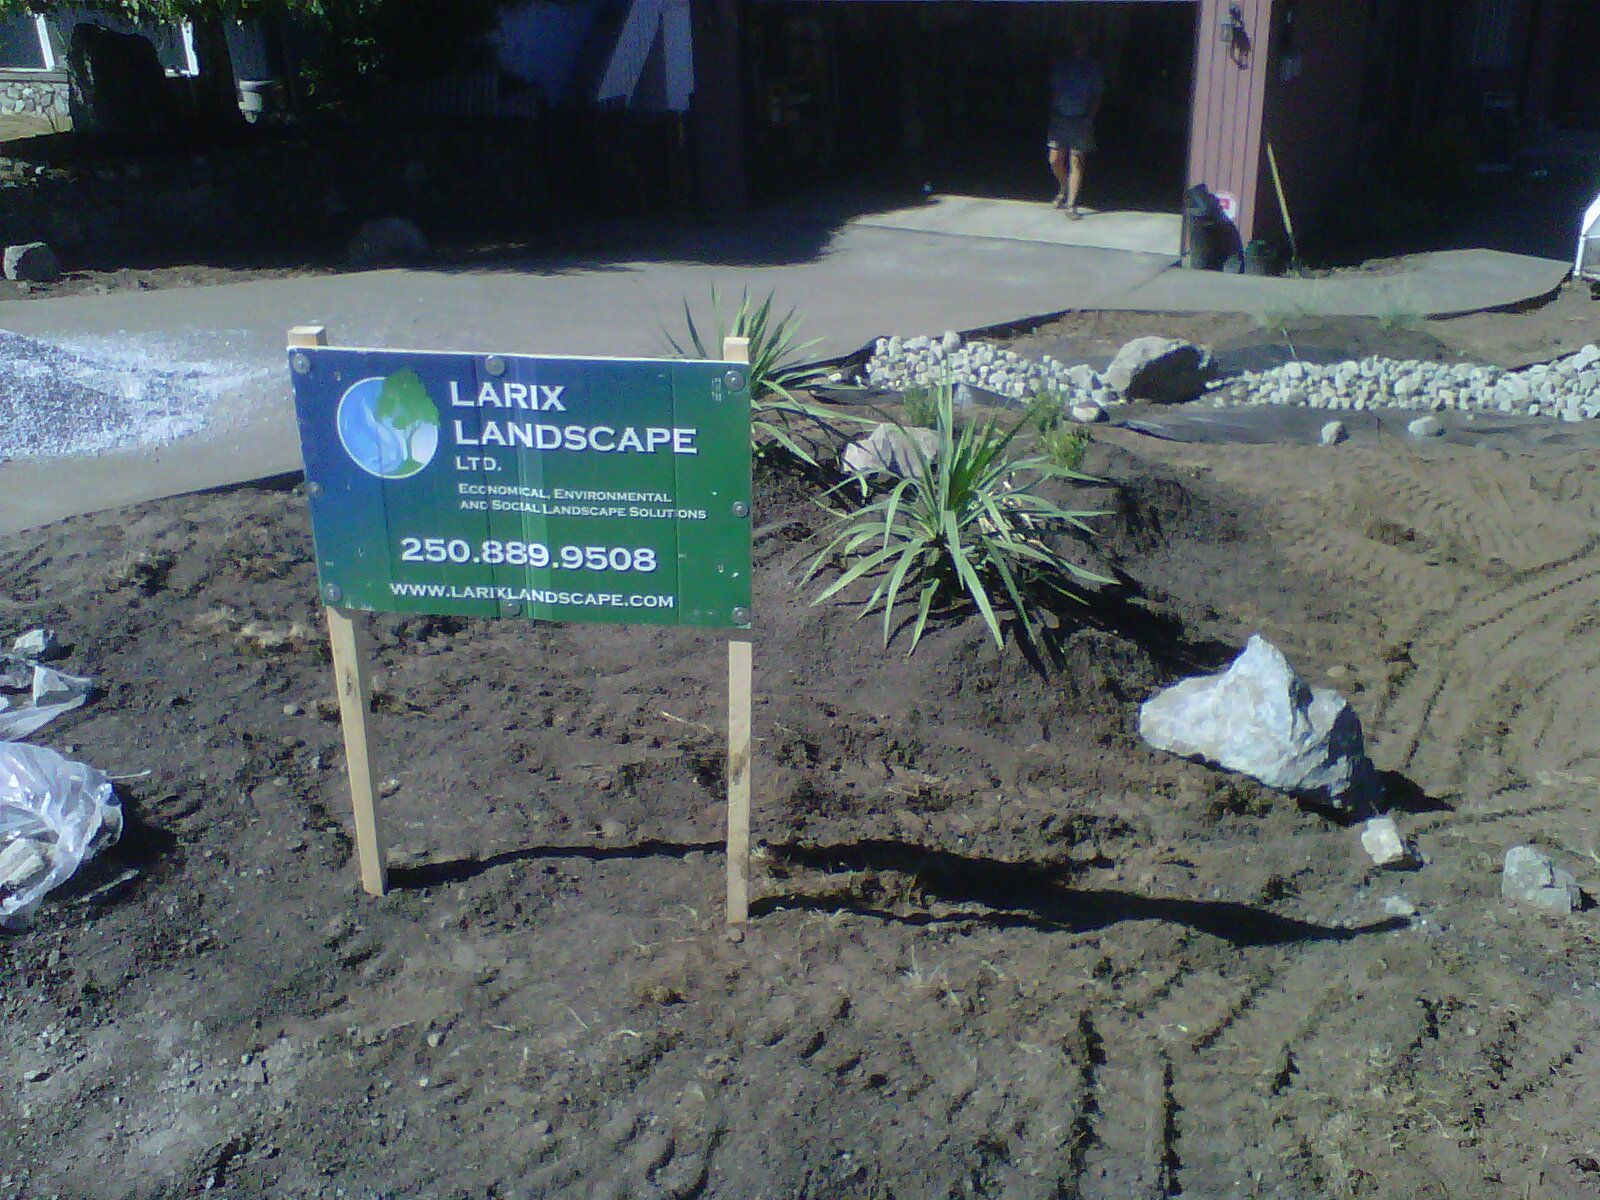 Picket sign with Larix Landscape logo and contact info planted in soil of residential front yard